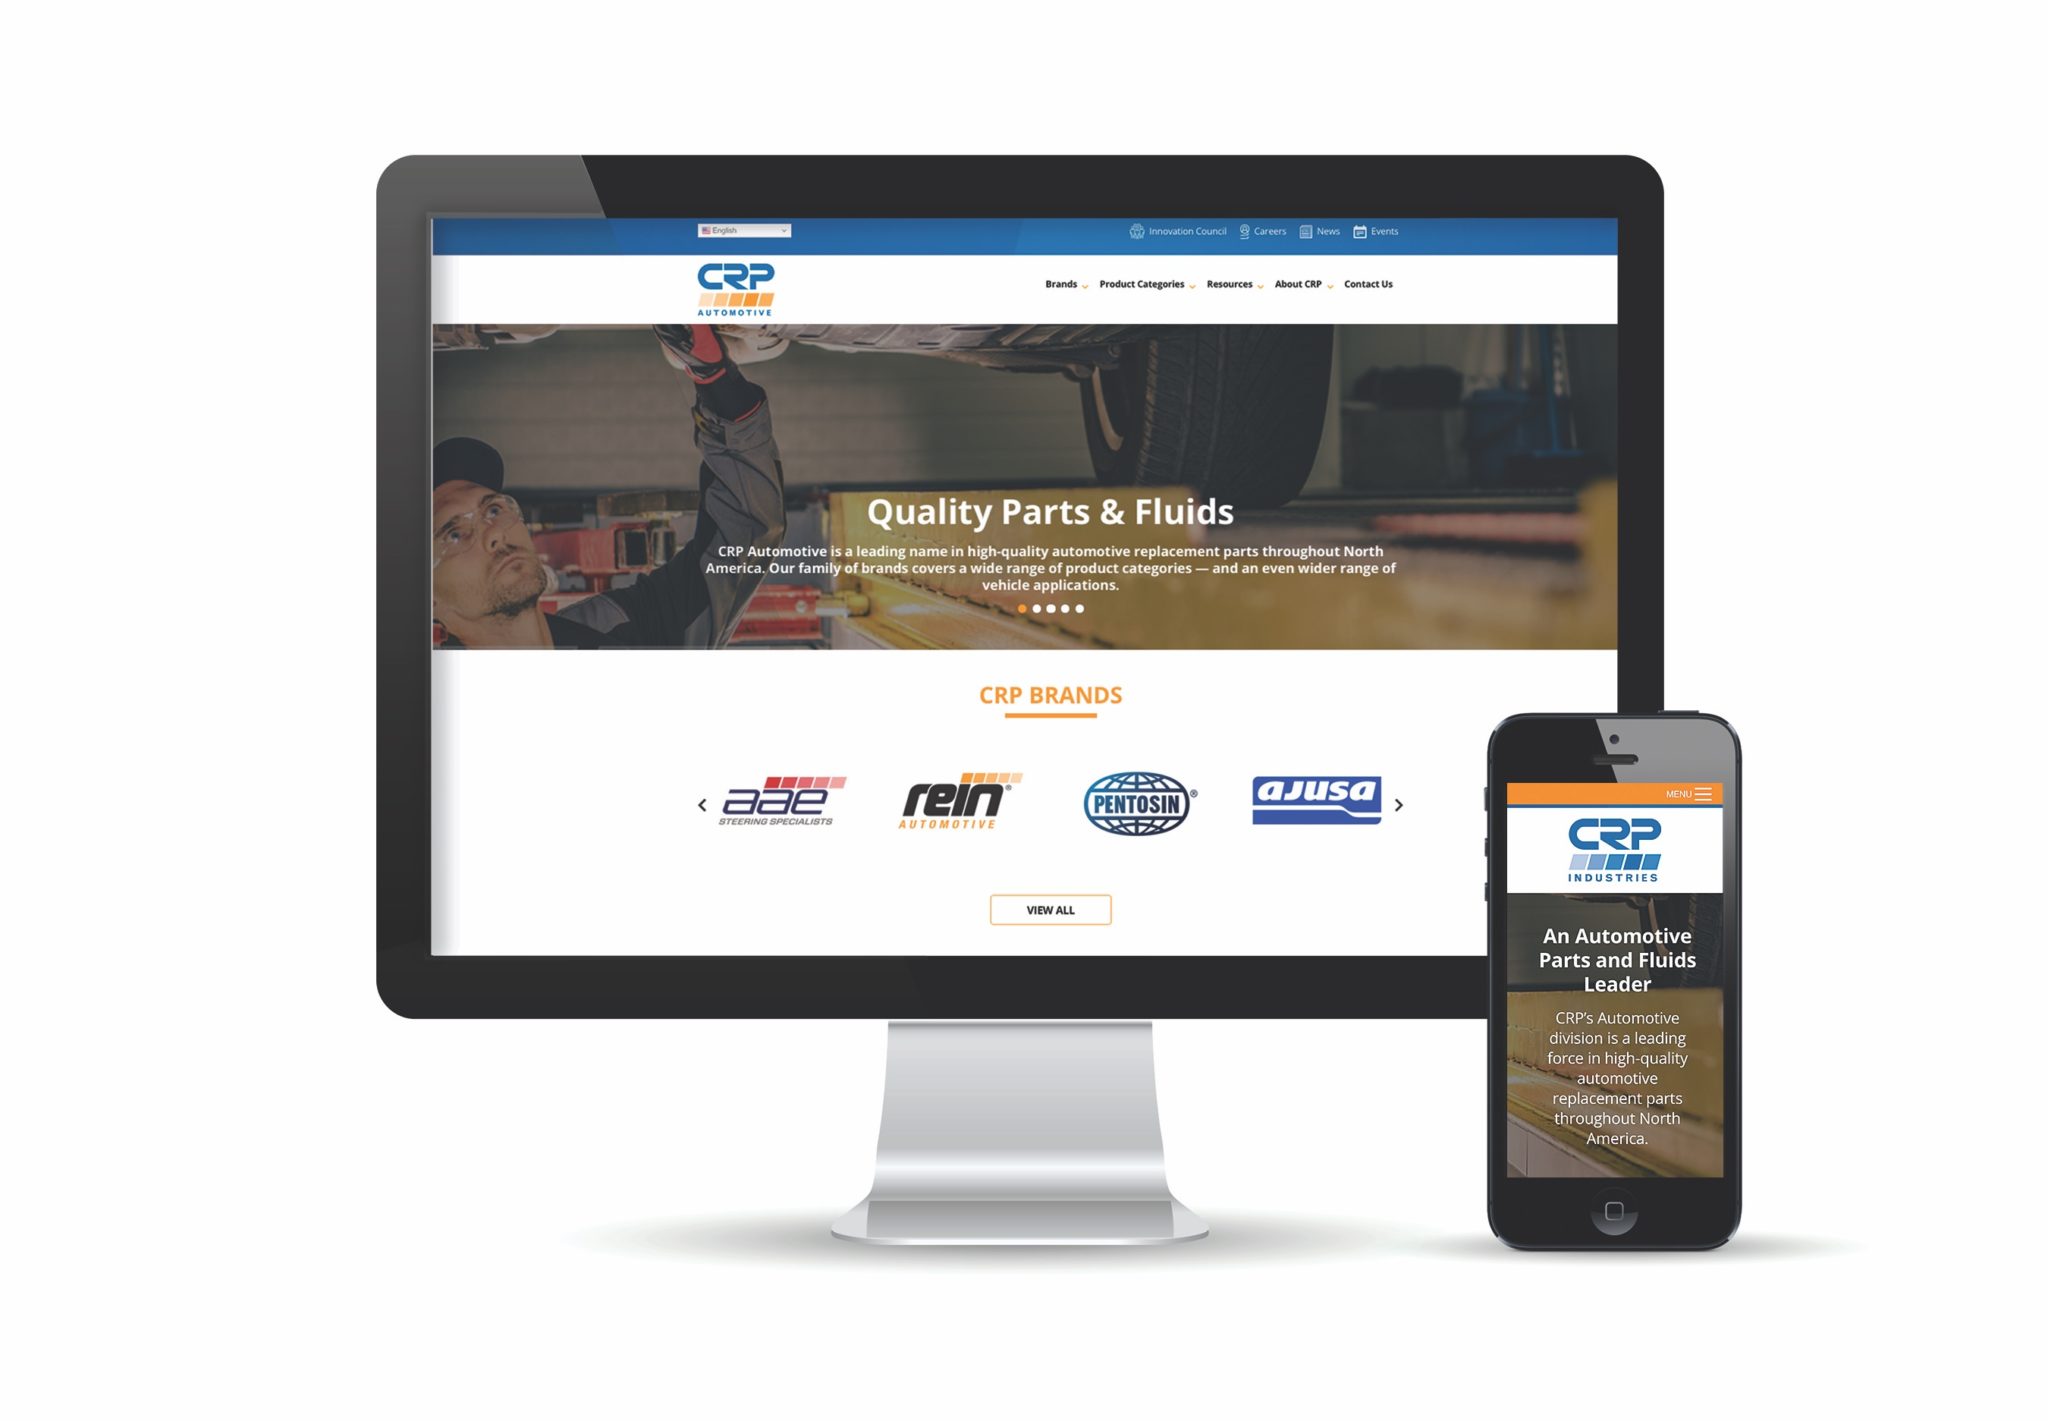 CRP Automotive, a leading source of OE-quality replacement and service parts, has just launched a new website at www.crpautomotive.com for professionals in the automotive industry that makes it easier and faster to find the latest information on parts and repairs. 